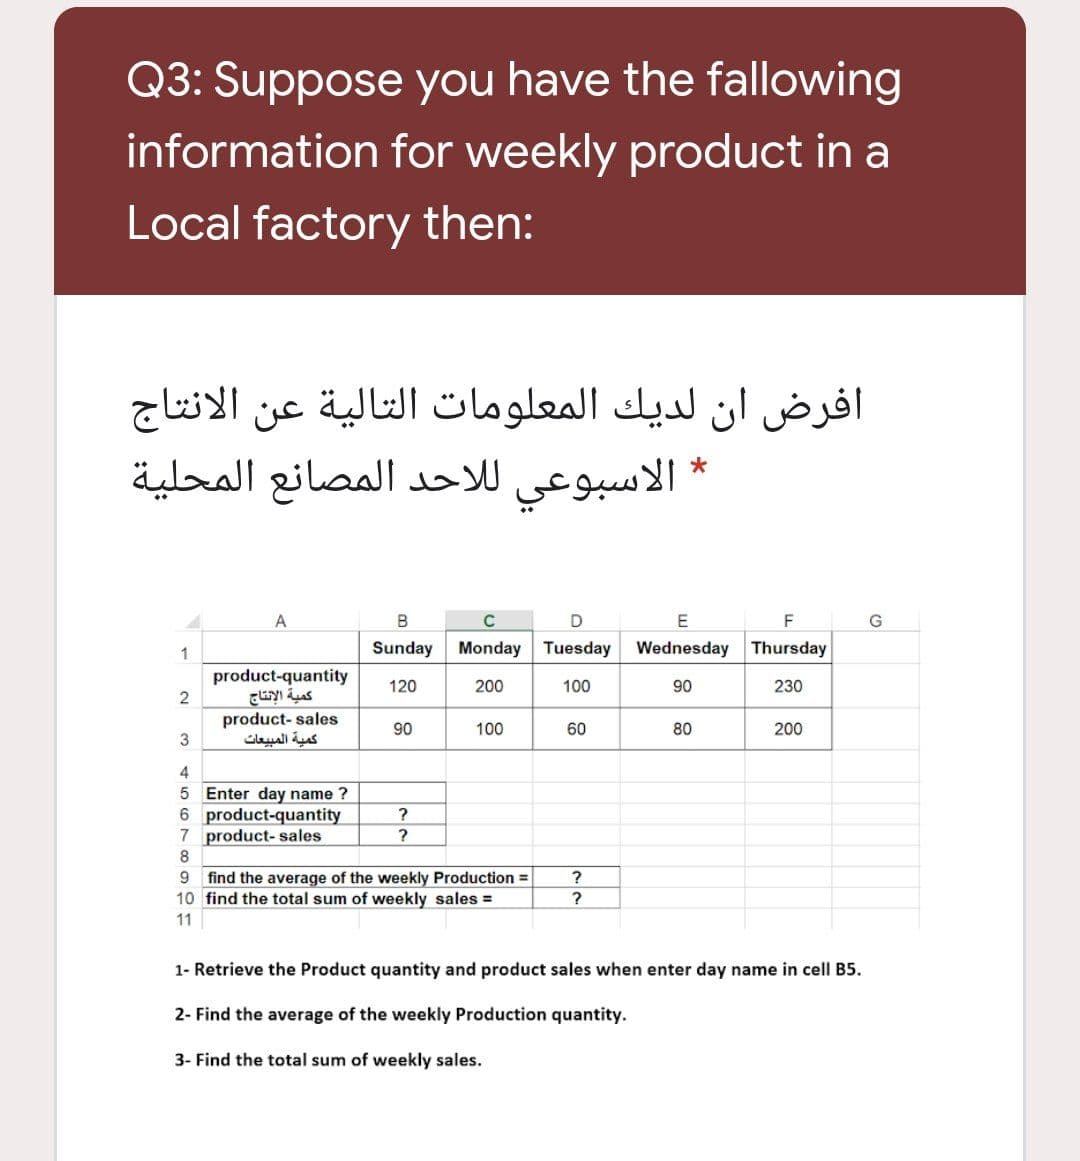 Q3: Suppose you have the fallowing
information for weekly product in a
Local factory then:
افرض ان لديك المعلومات التالية عن الانتاج
للاحد المصانع المحلية
الاسبوعي
A
B
1
Sunday
Monday Tuesday Wednesday Thursday
product-quantity
كمية الإنتاج
product- sales
كمية المبيعات
120
200
100
90
230
90
100
60
80
200
4
5 Enter day name ?
6 product-quantity
7 product- sales
8
?
9 find the average of the weekly Production D
10 find the total sum of weekly sales =
11
?
1- Retrieve the Product quantity and product sales when enter day name in cell B5.
2- Find the average of the weekly Production quantity.
3- Find the total sum of weekly sales.
